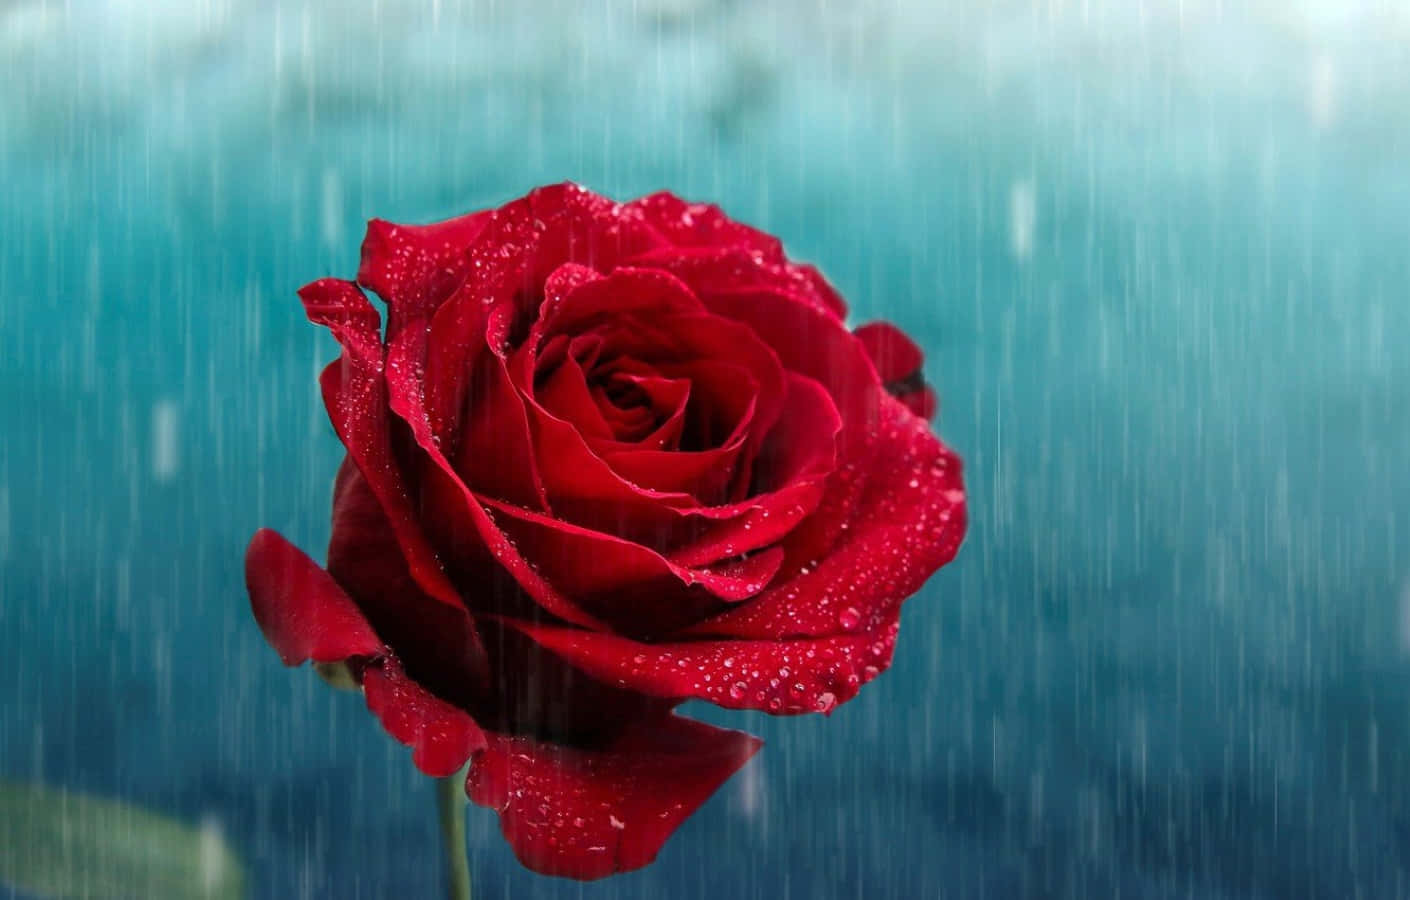 A delicate rose in the midst of a gentle rain shower Wallpaper